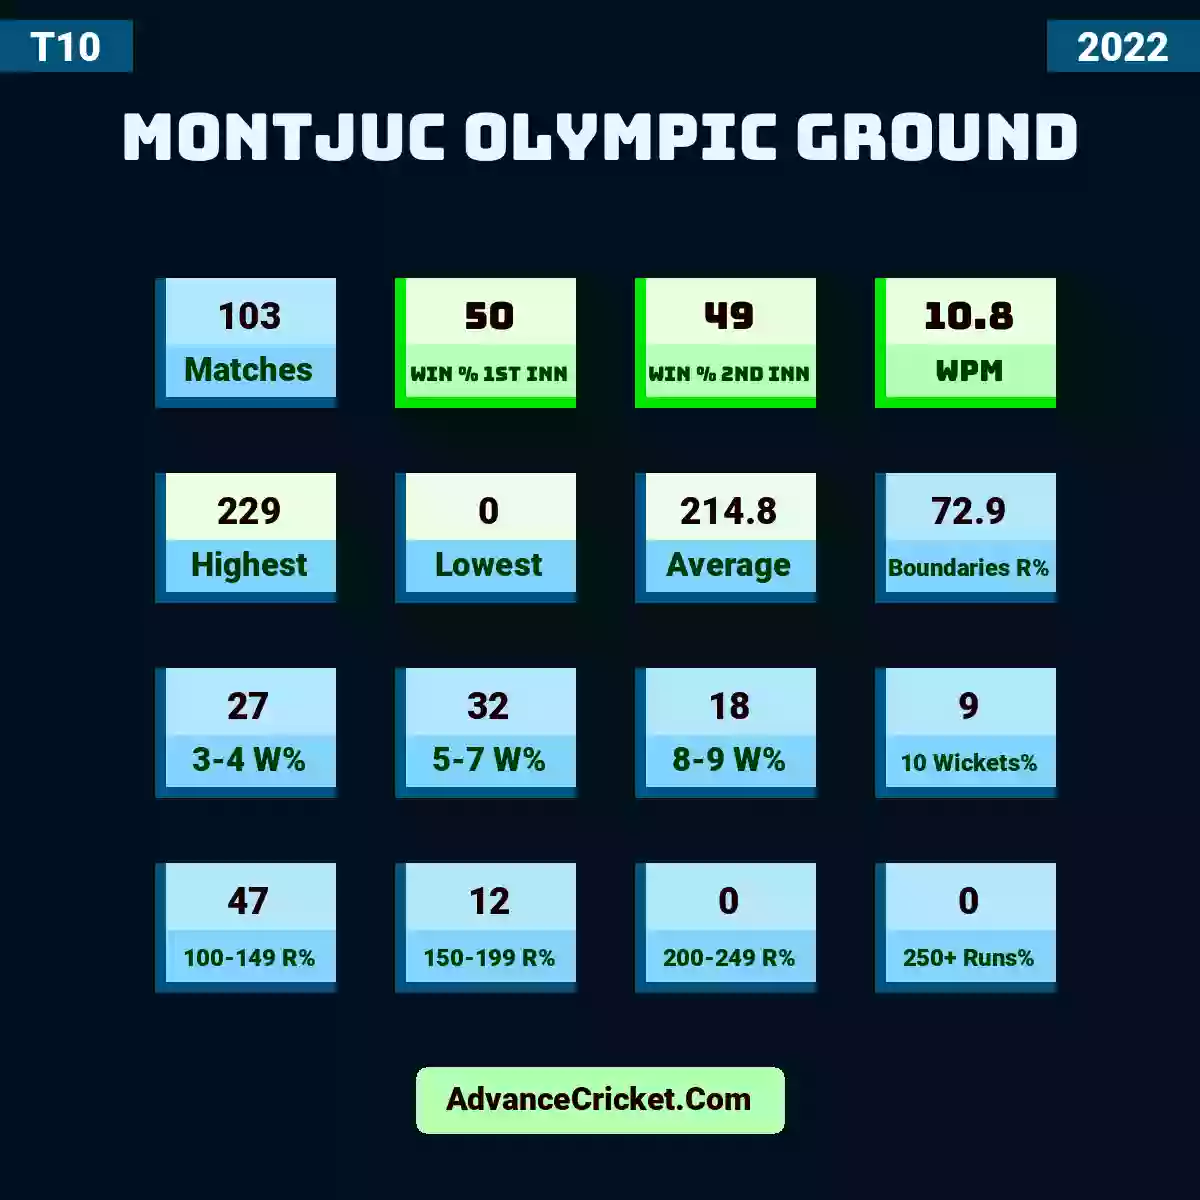 Image showing Montjuc Olympic Ground with Matches: 103, Win % 1st Inn: 50, Win % 2nd Inn: 49, WPM: 10.8, Highest: 229, Lowest: 0, Average: 214.8, Boundaries R%: 72.9, 3-4 W%: 27, 5-7 W%: 32, 8-9 W%: 18, 10 Wickets%: 9, 100-149 R%: 47, 150-199 R%: 12, 200-249 R%: 0, 250+ Runs%: 0.